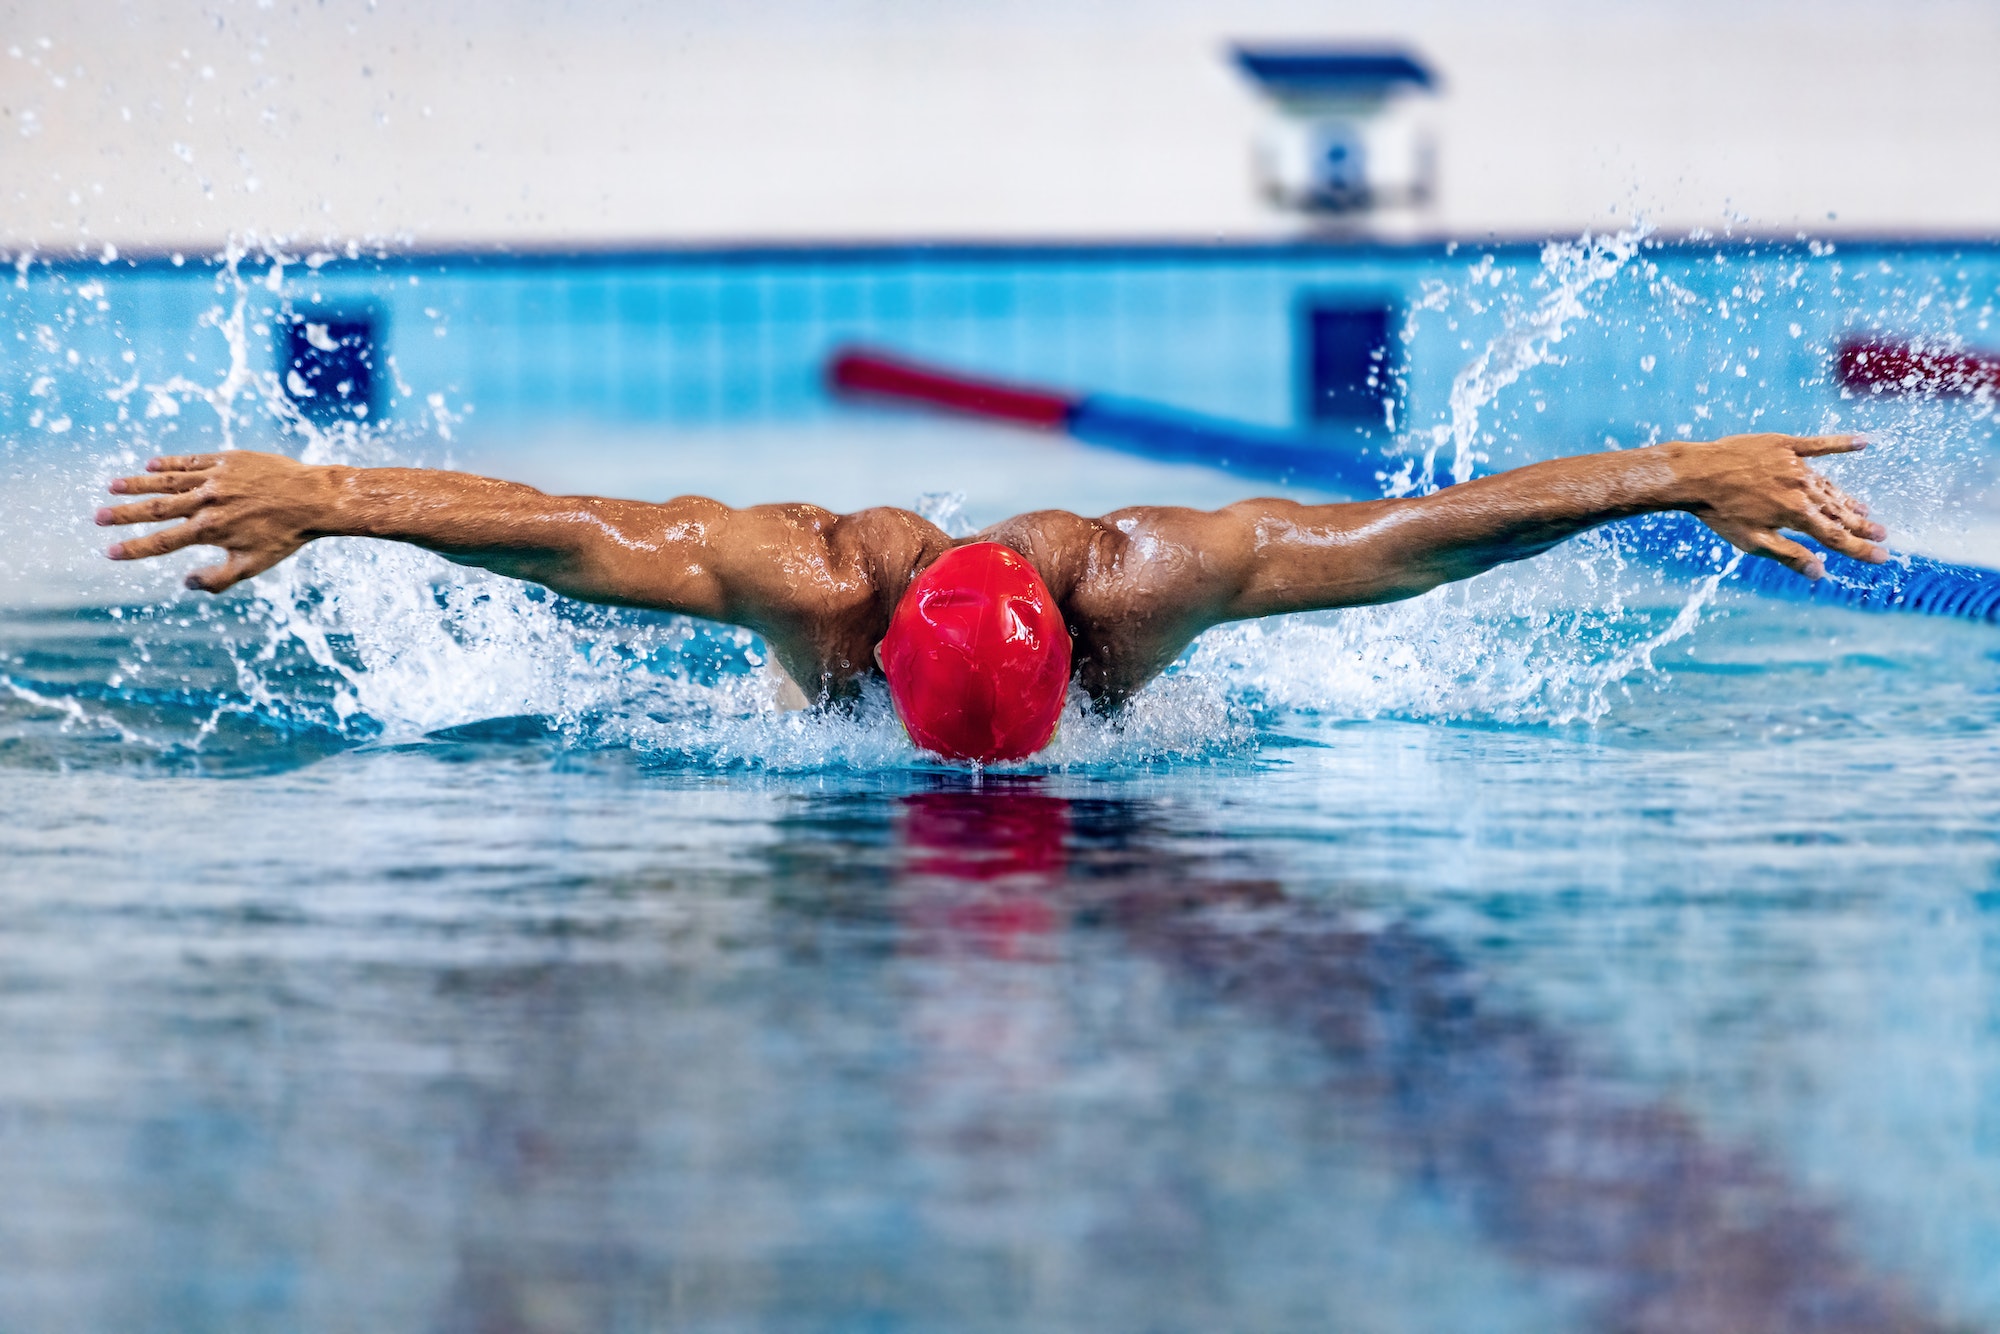 Professional male swimmer in swimming cap and goggles in motion and action during training at pool